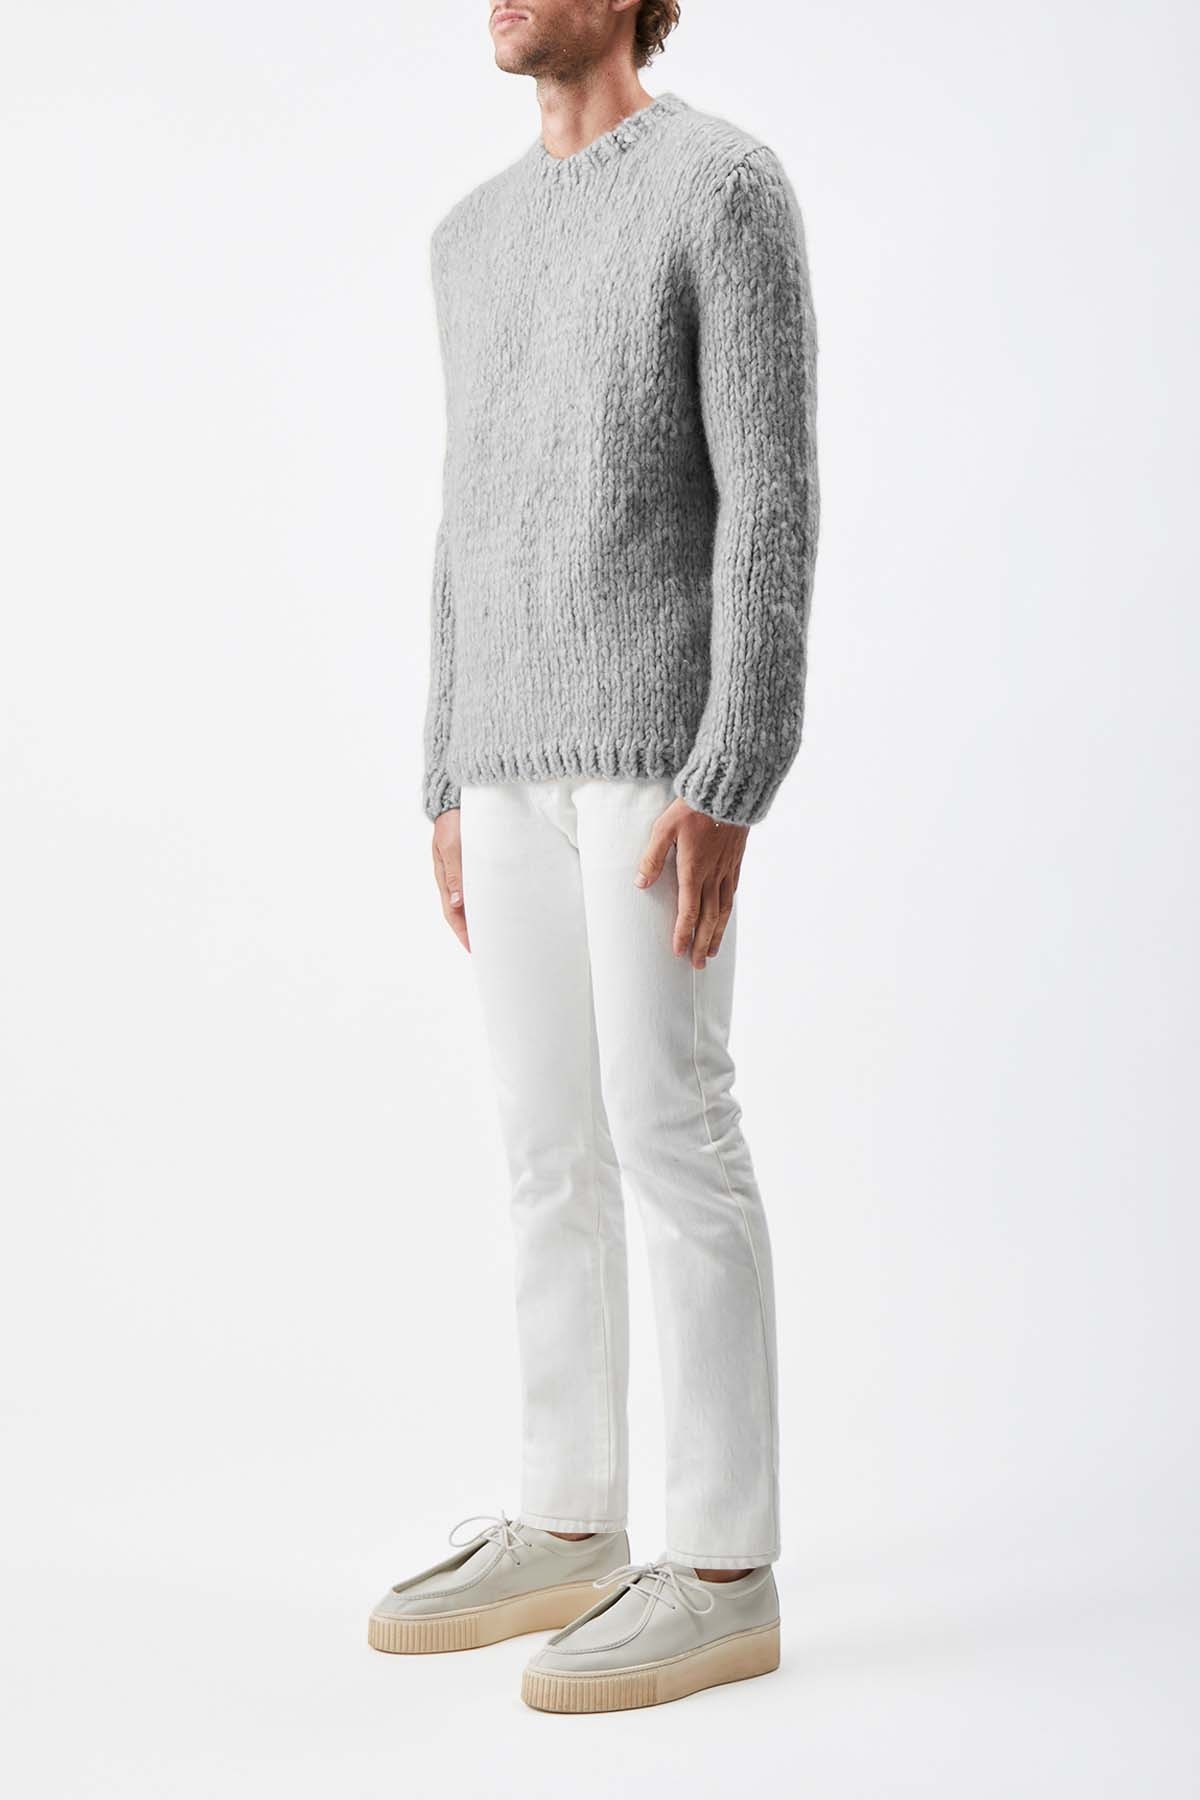 Lawrence Knit Sweater in Heather Grey Welfat Cashmere - 3